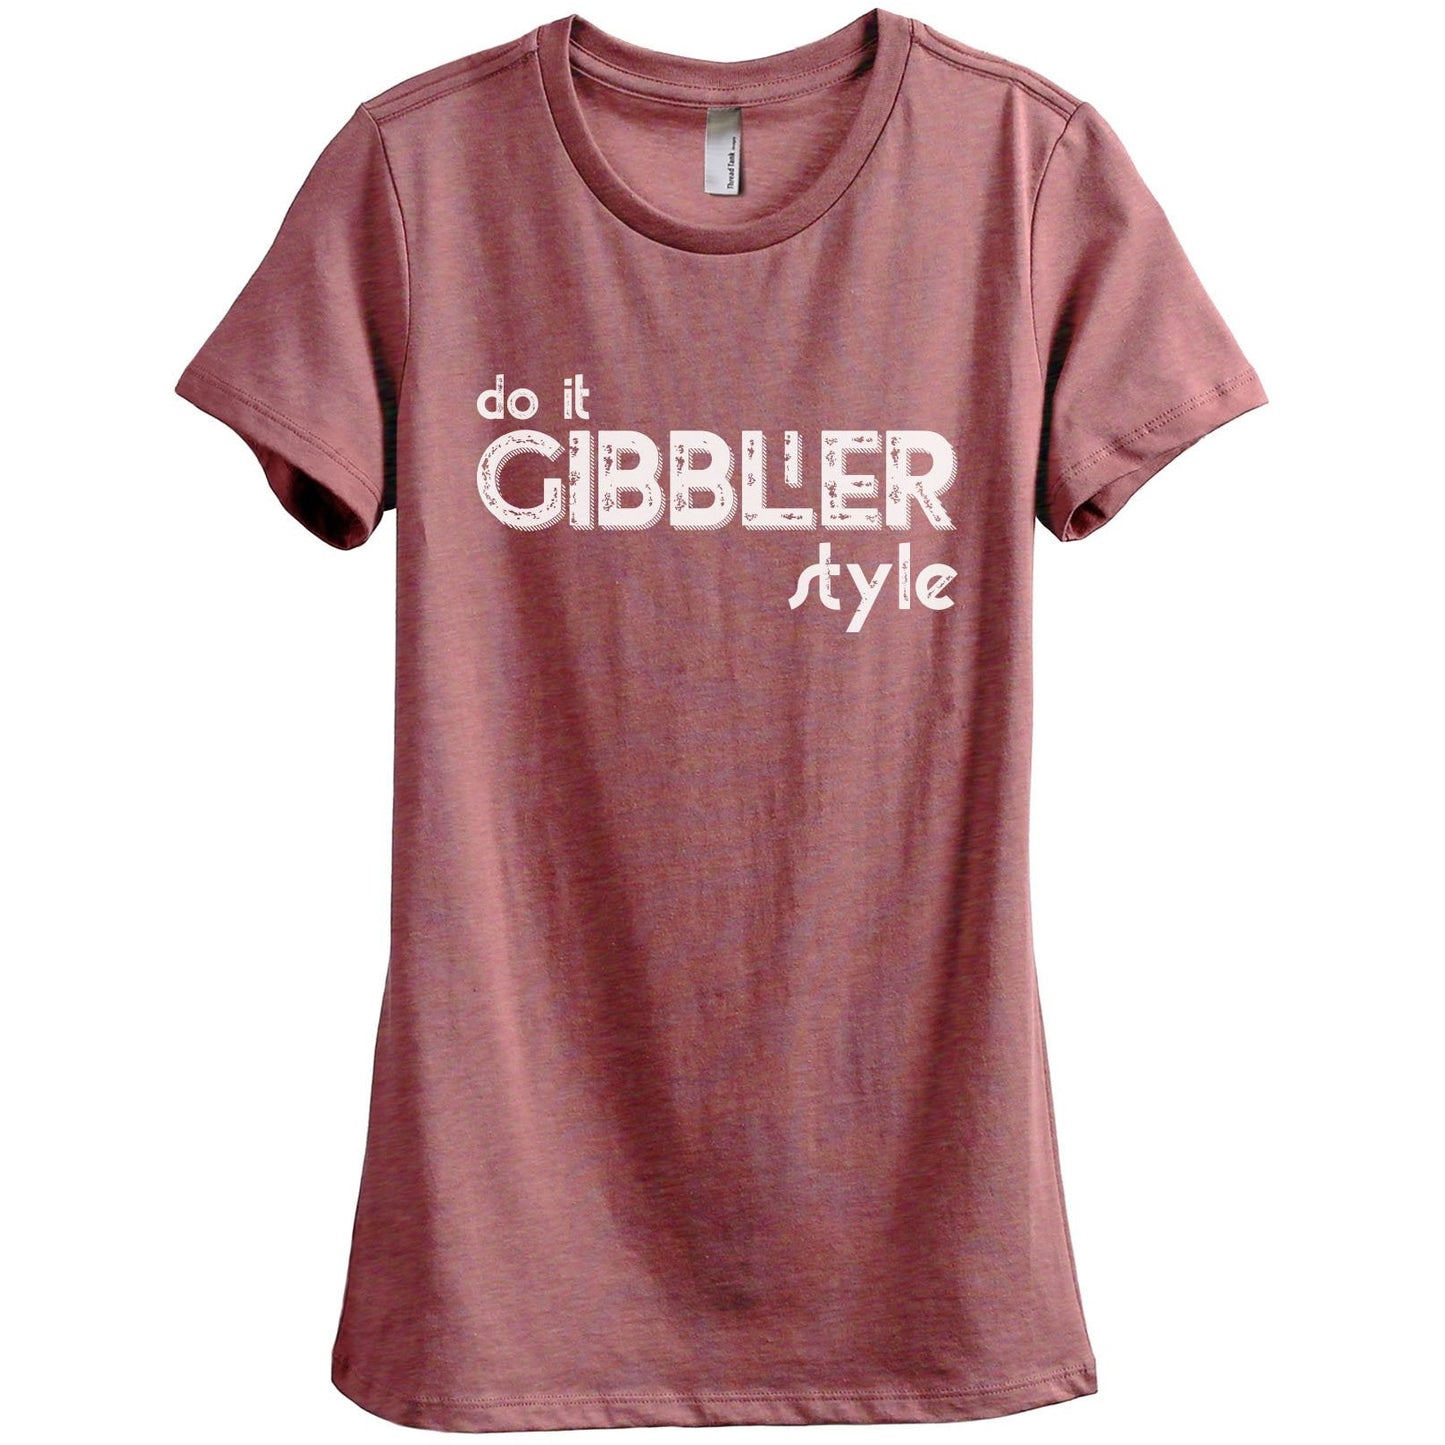 Do It Gibbler Style - Thread Tank | Stories You Can Wear | T-Shirts, Tank Tops and Sweatshirts